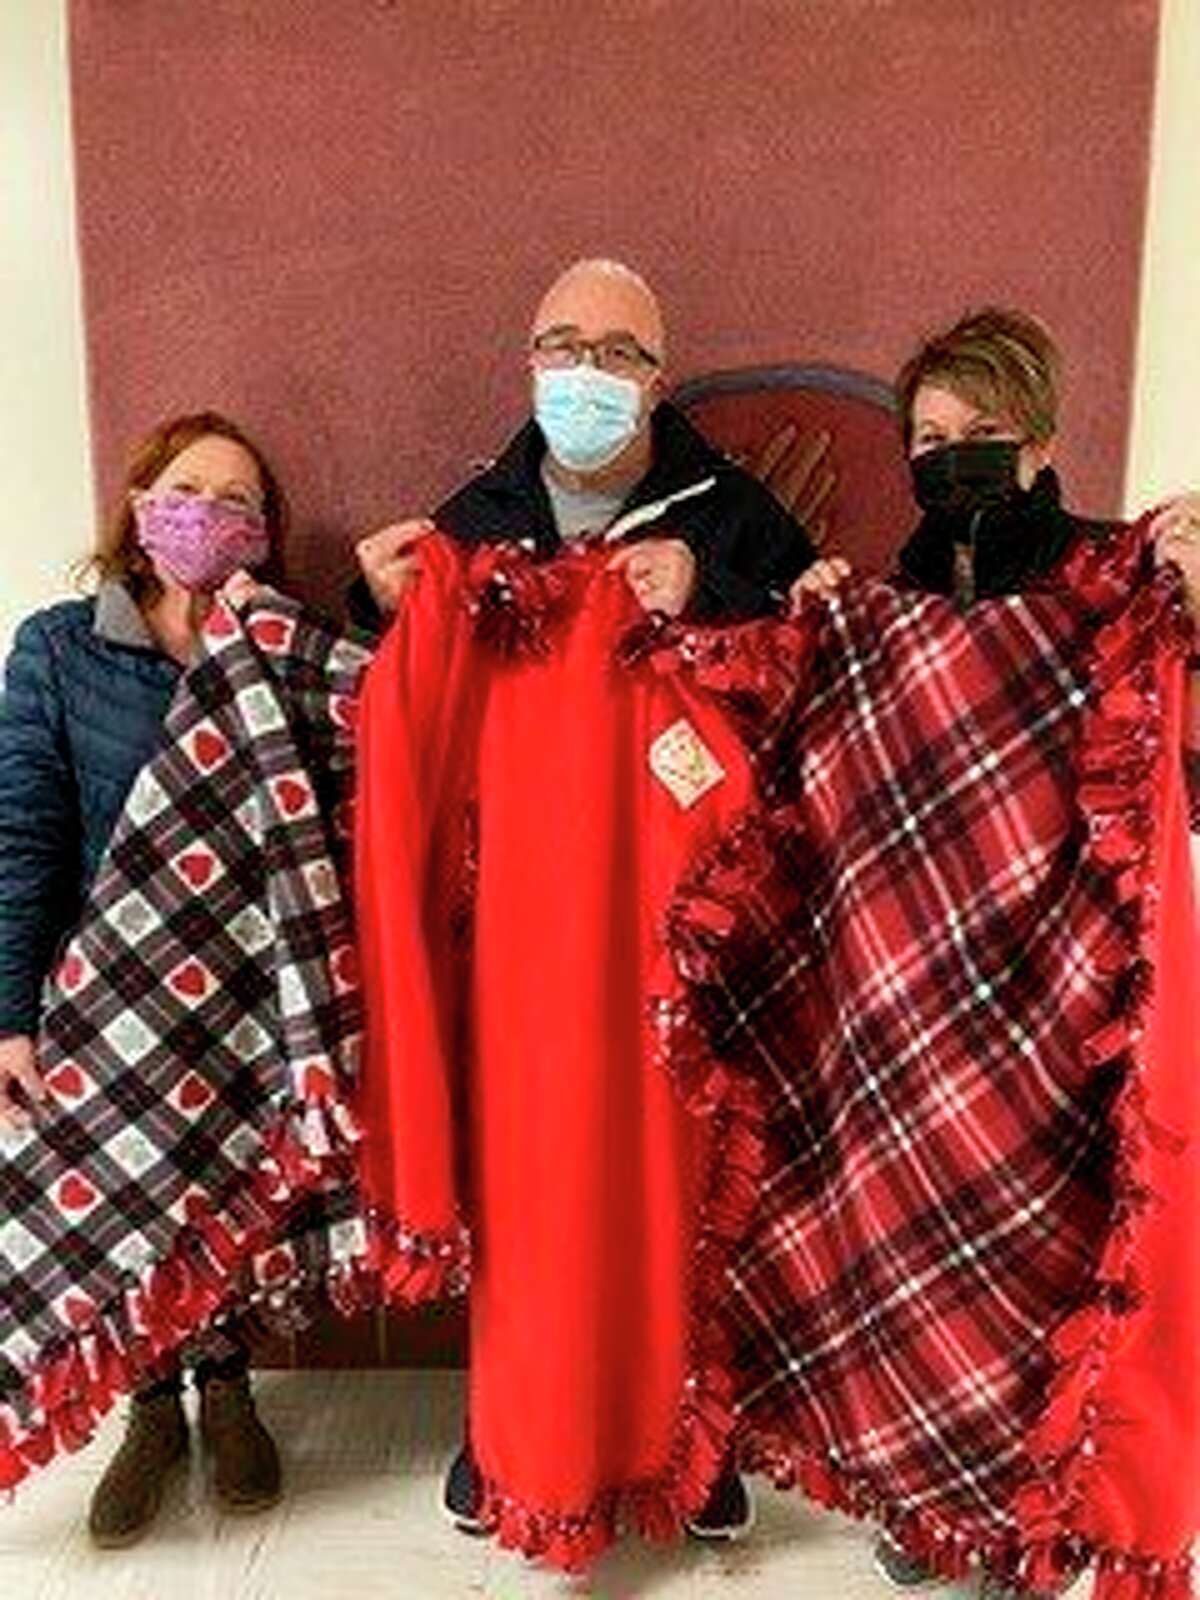 Midland Community Former Offenders Advocacy's executive director Rob Worsley, middle, accepts fleece blankets made by the Ladies of Blessed Sacrament recently made and donated fleece blankets for his organization. (Photo provided)